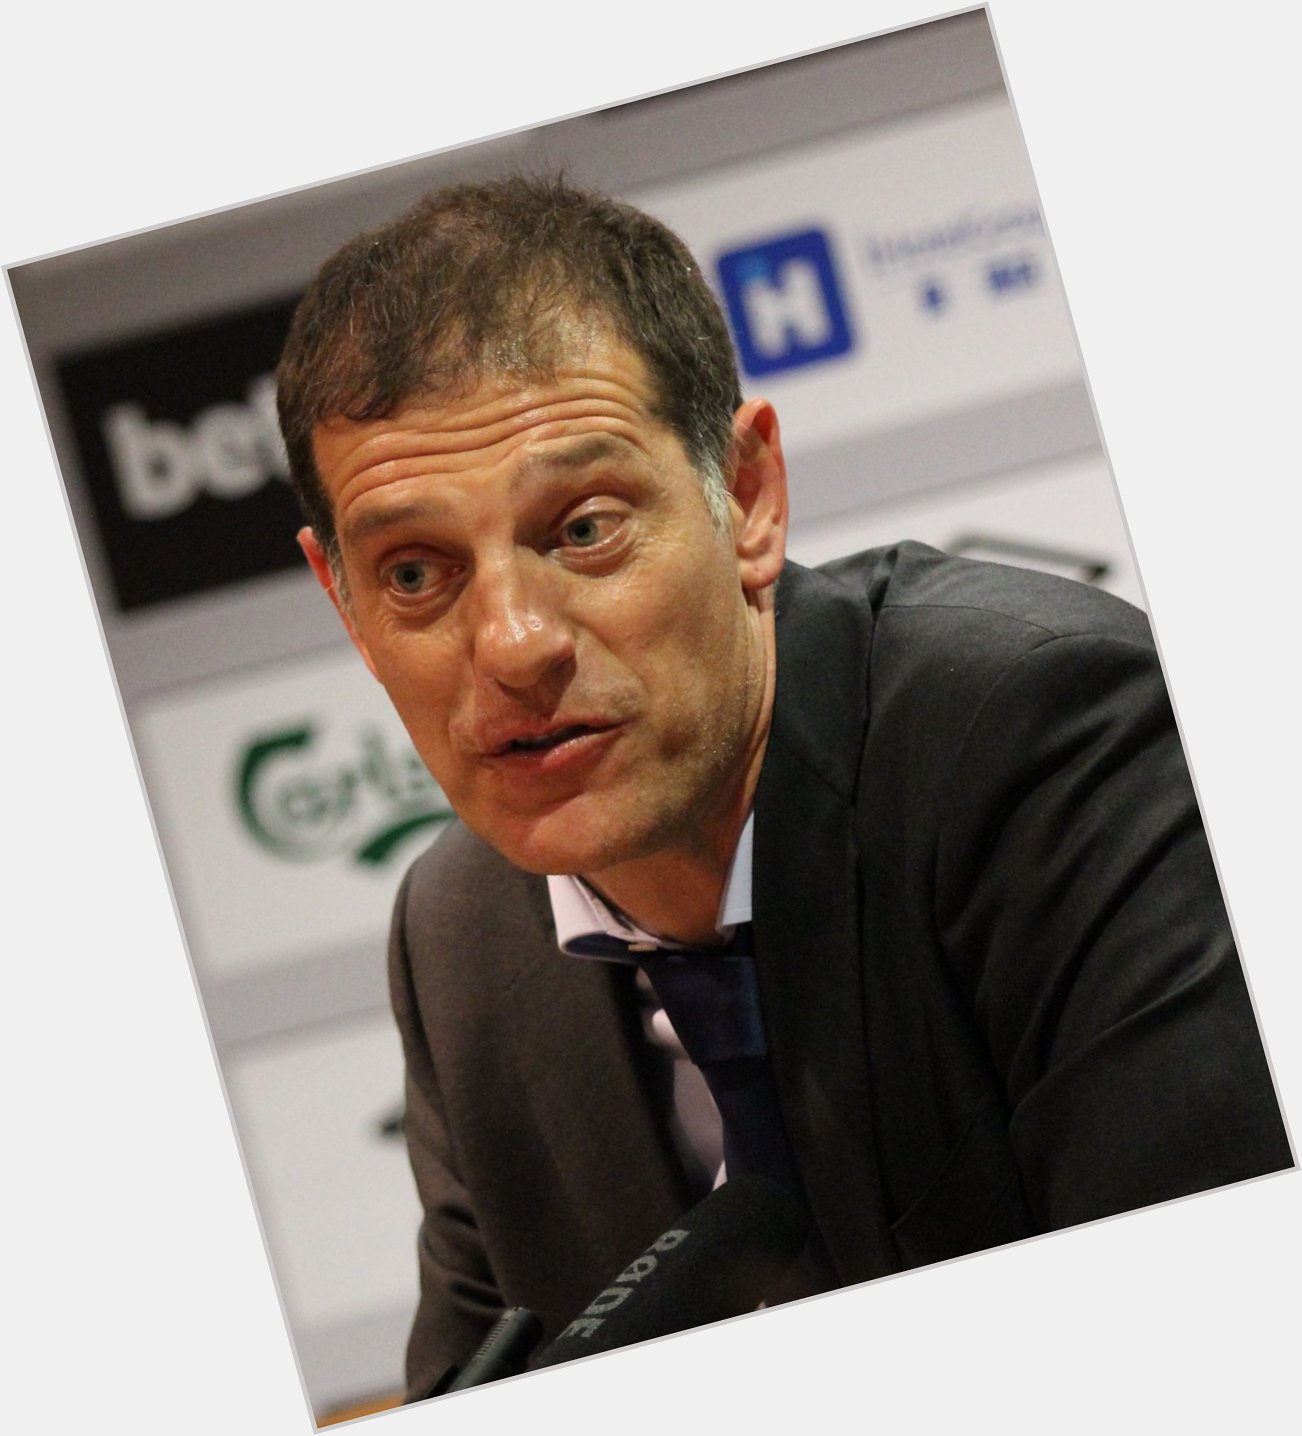 Happy 54th birthday to former Hammers manager and player Slaven Bilic 